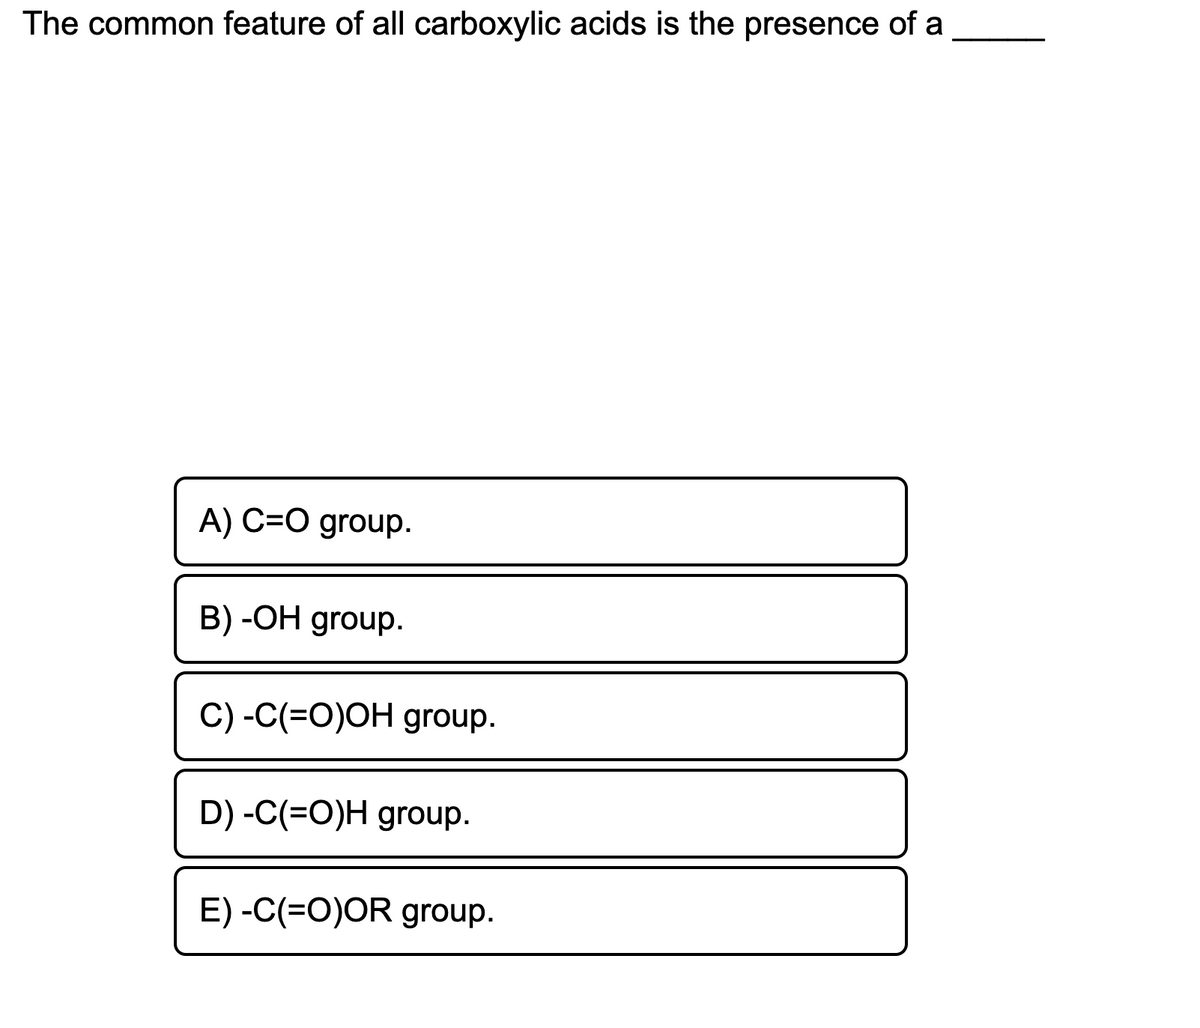 The common feature of all carboxylic acids is the presence of a
A) C=O group.
B) -OH group.
C) -C(=O)OH group.
D) -C(=O)H group.
E) -C(=O)OR group.
